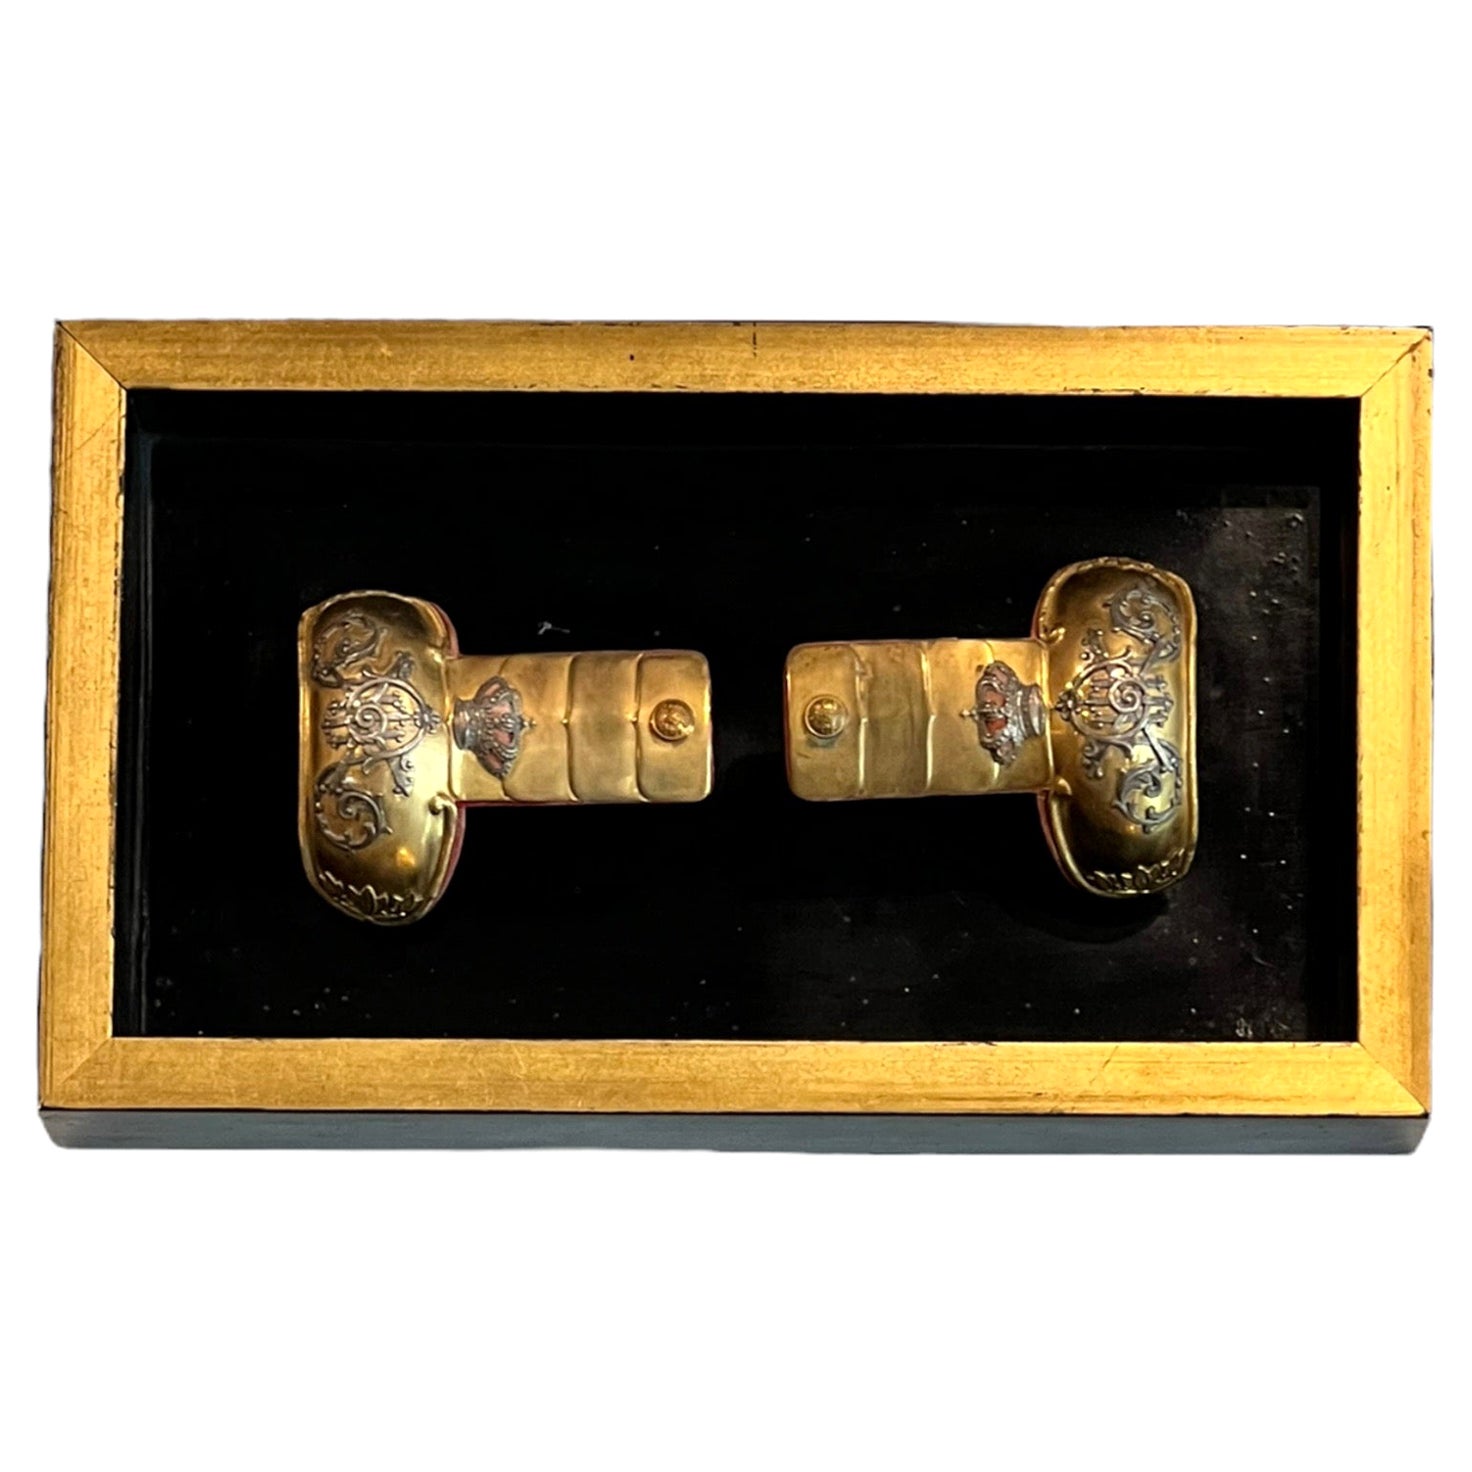 Early 19th Century Spanish Pair of Military Shoulder Epaulettes